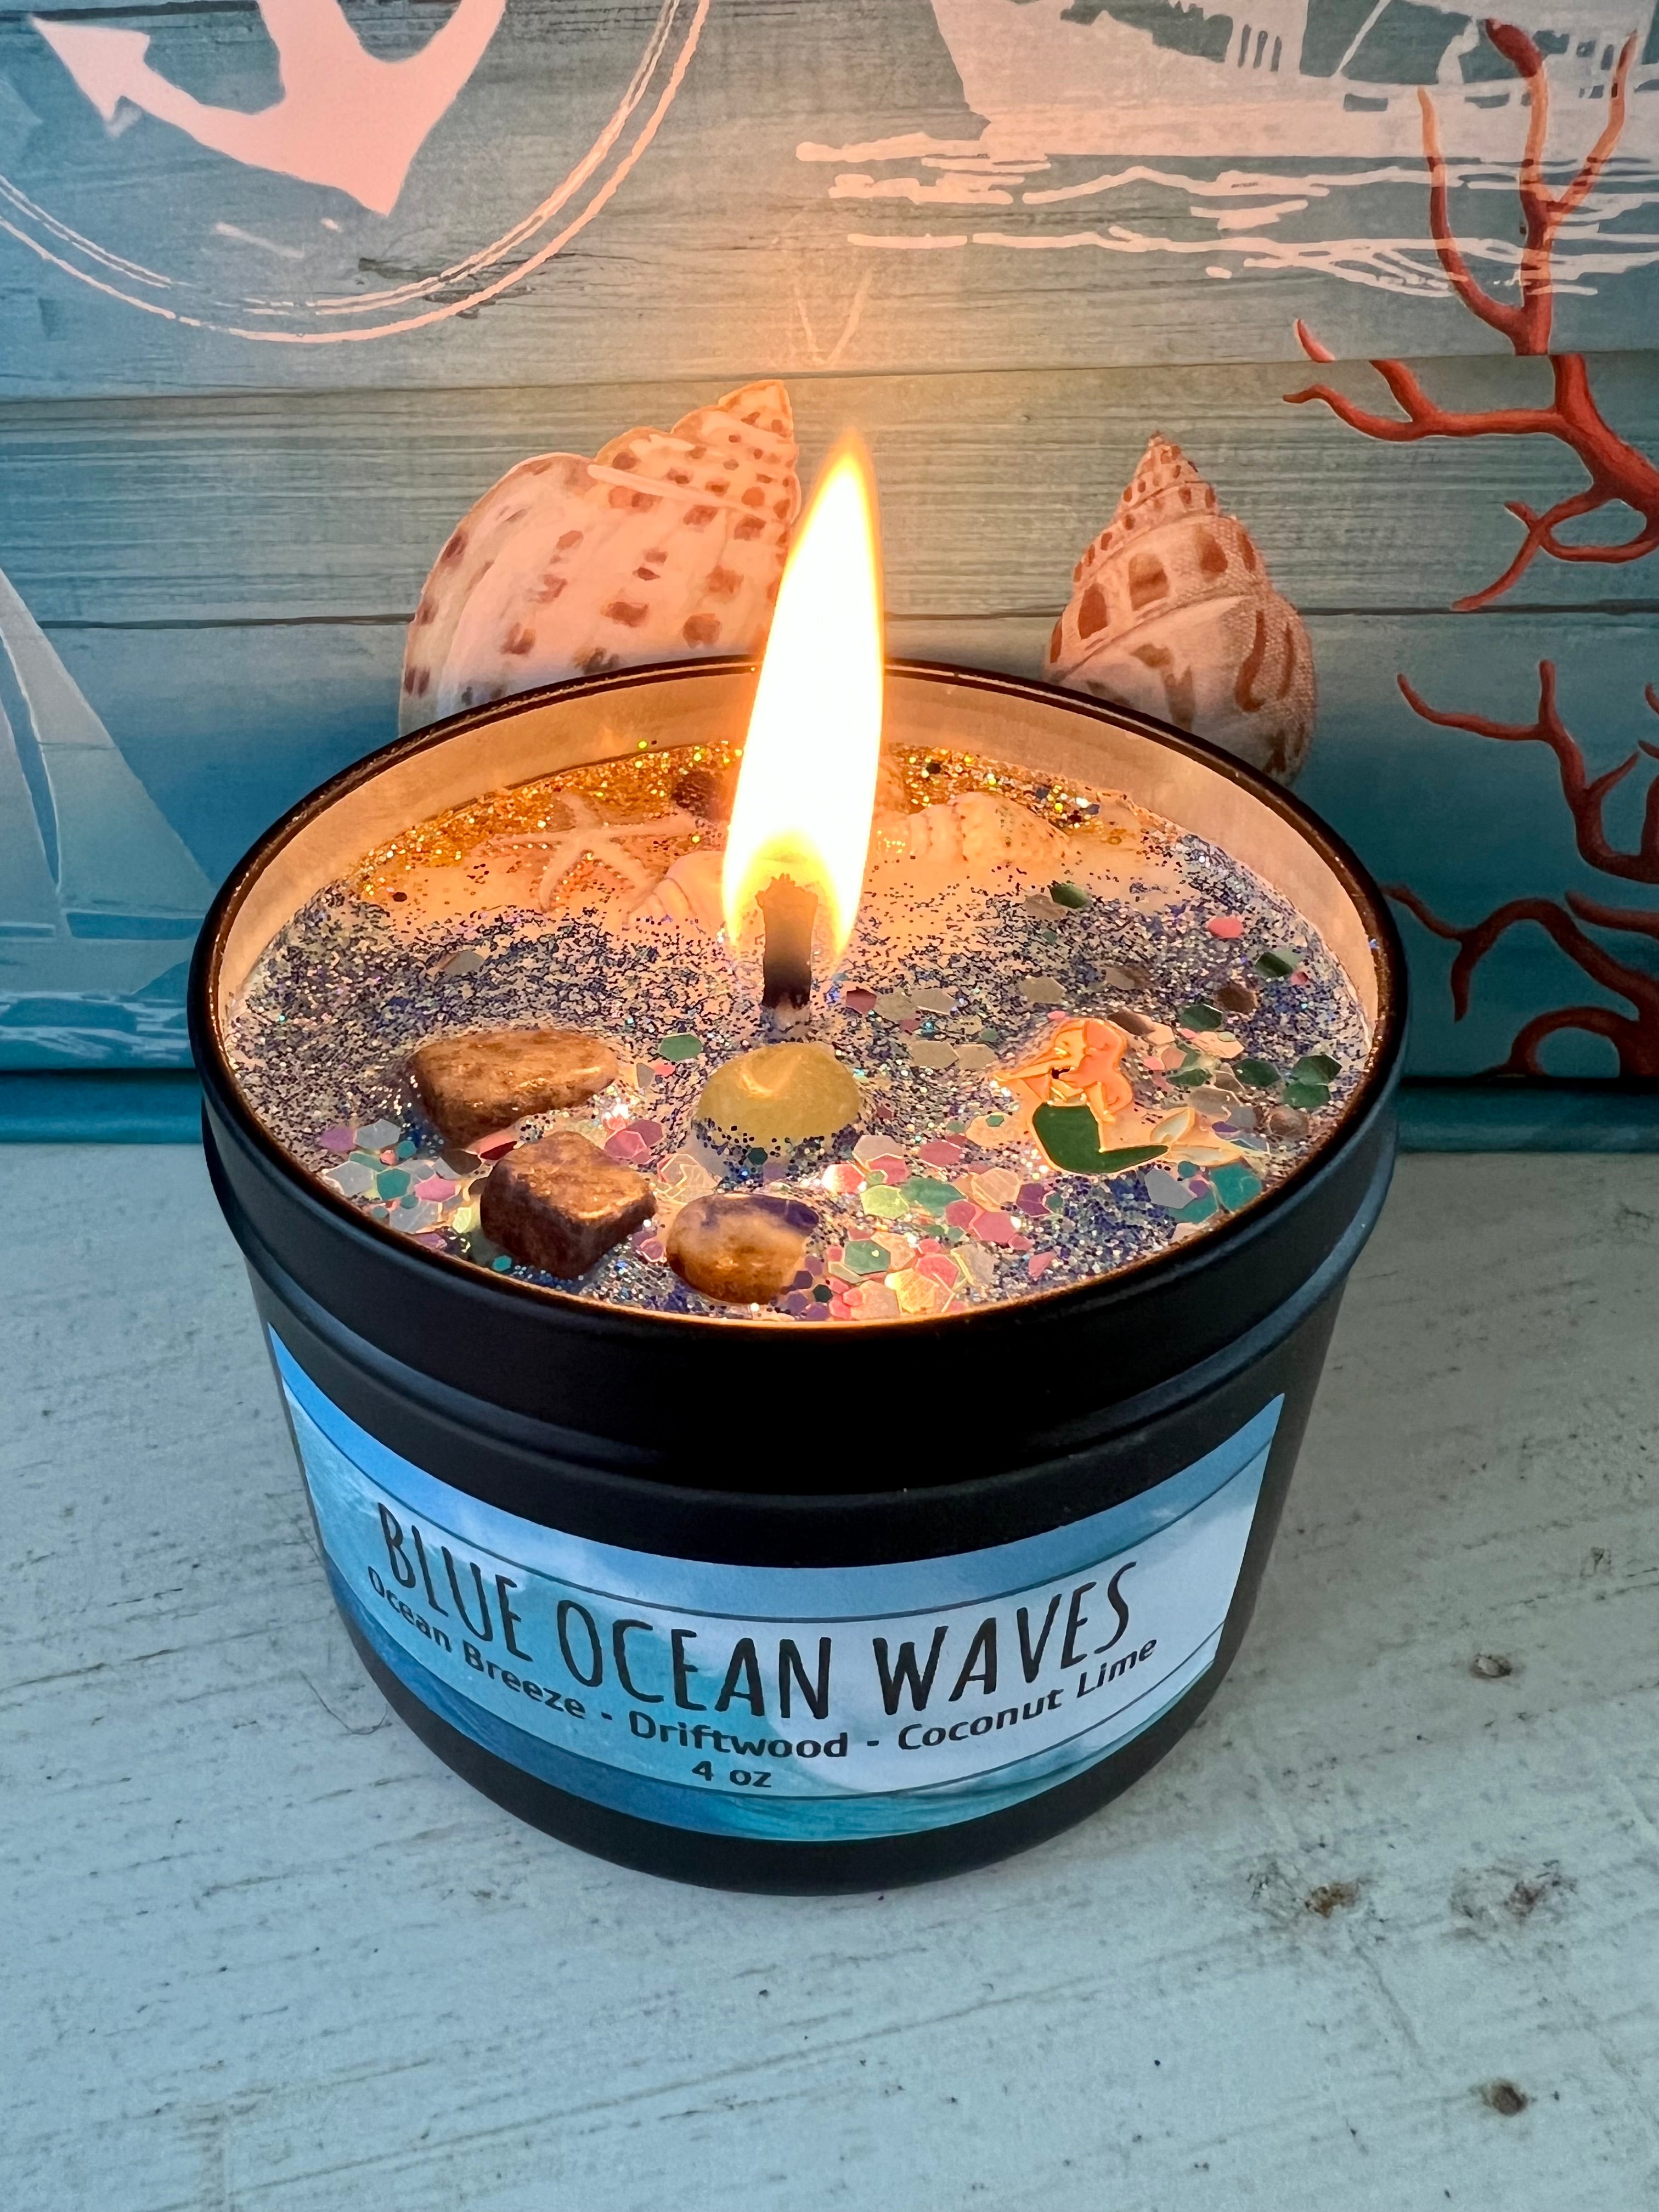 Blue Ocean Waves Candle Tin